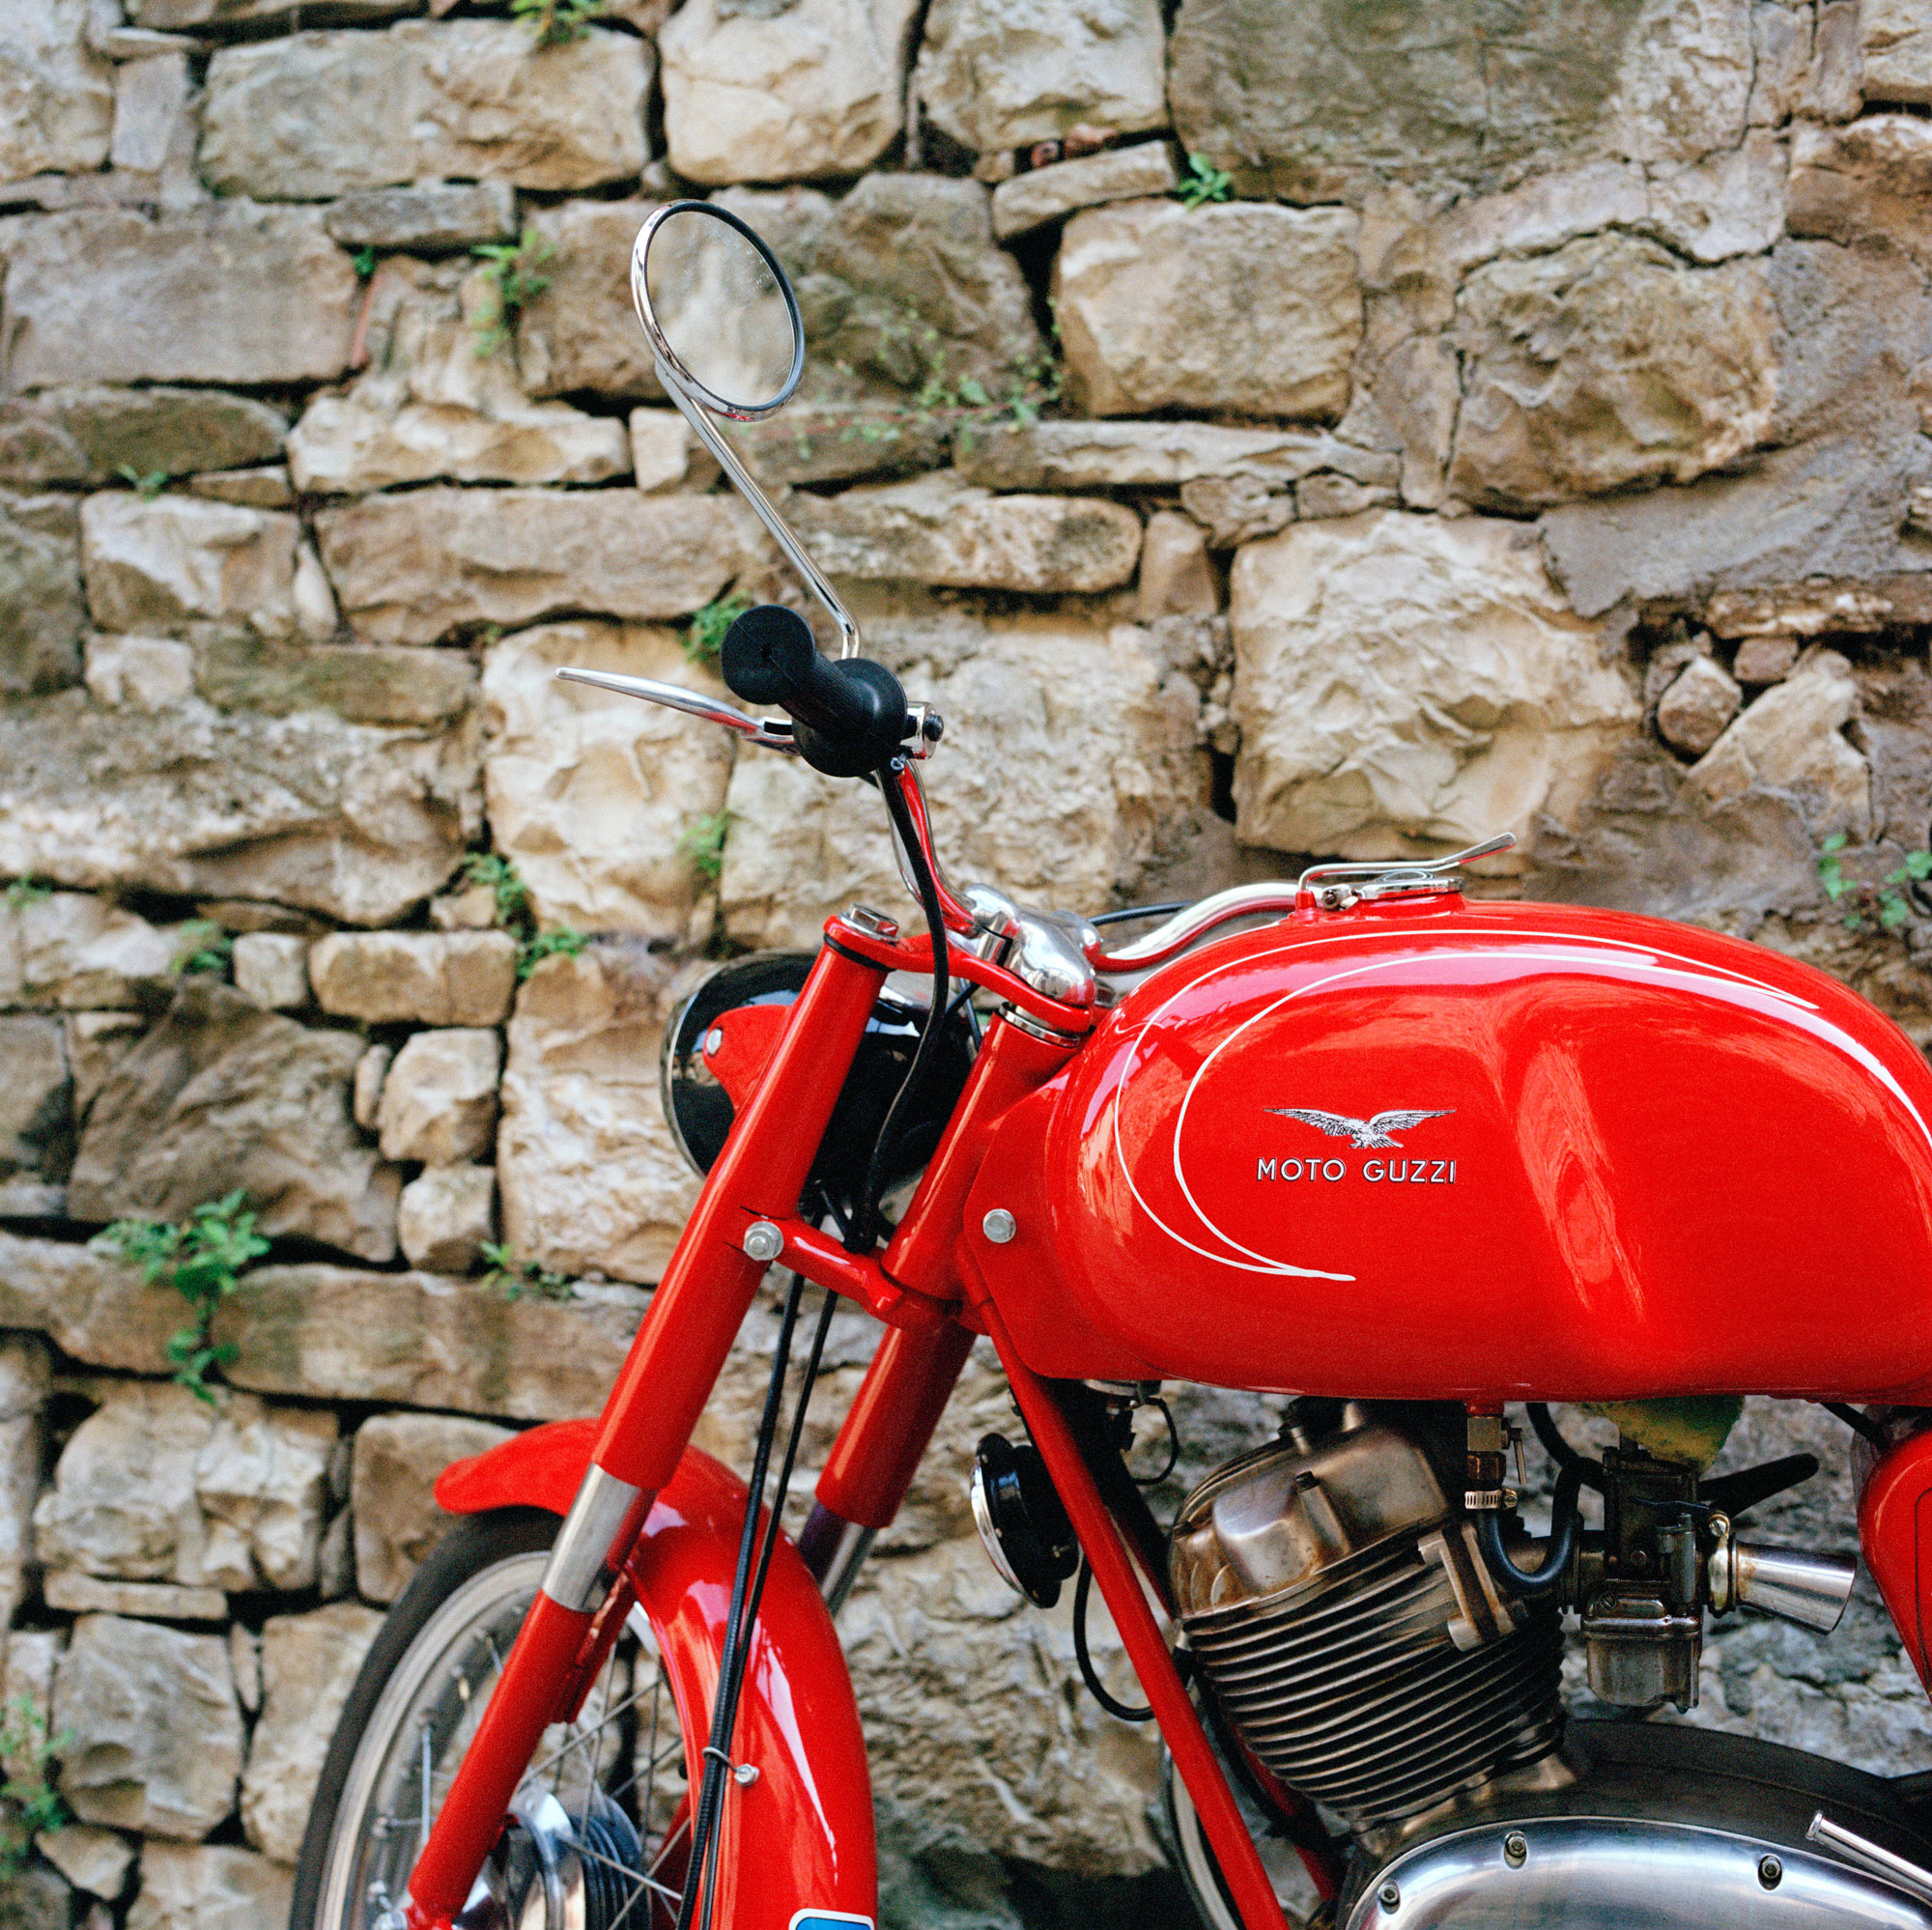 Tuscany by motorcycle - top